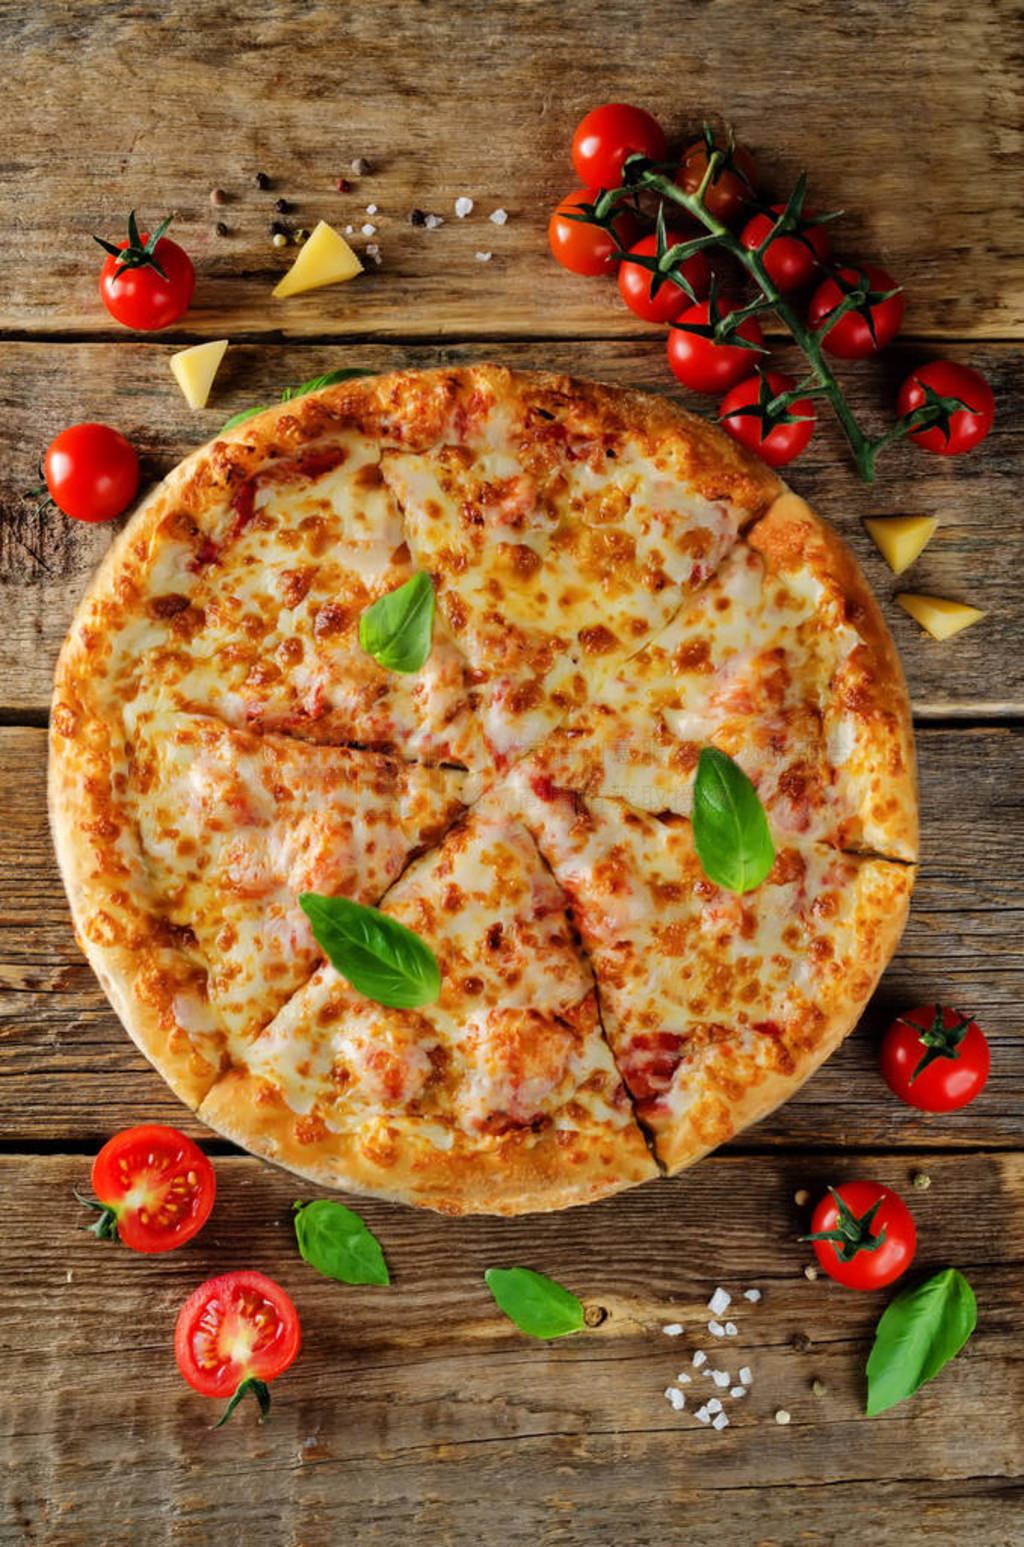 Pizza with cheese, tomato sauce and fresh tomatoes